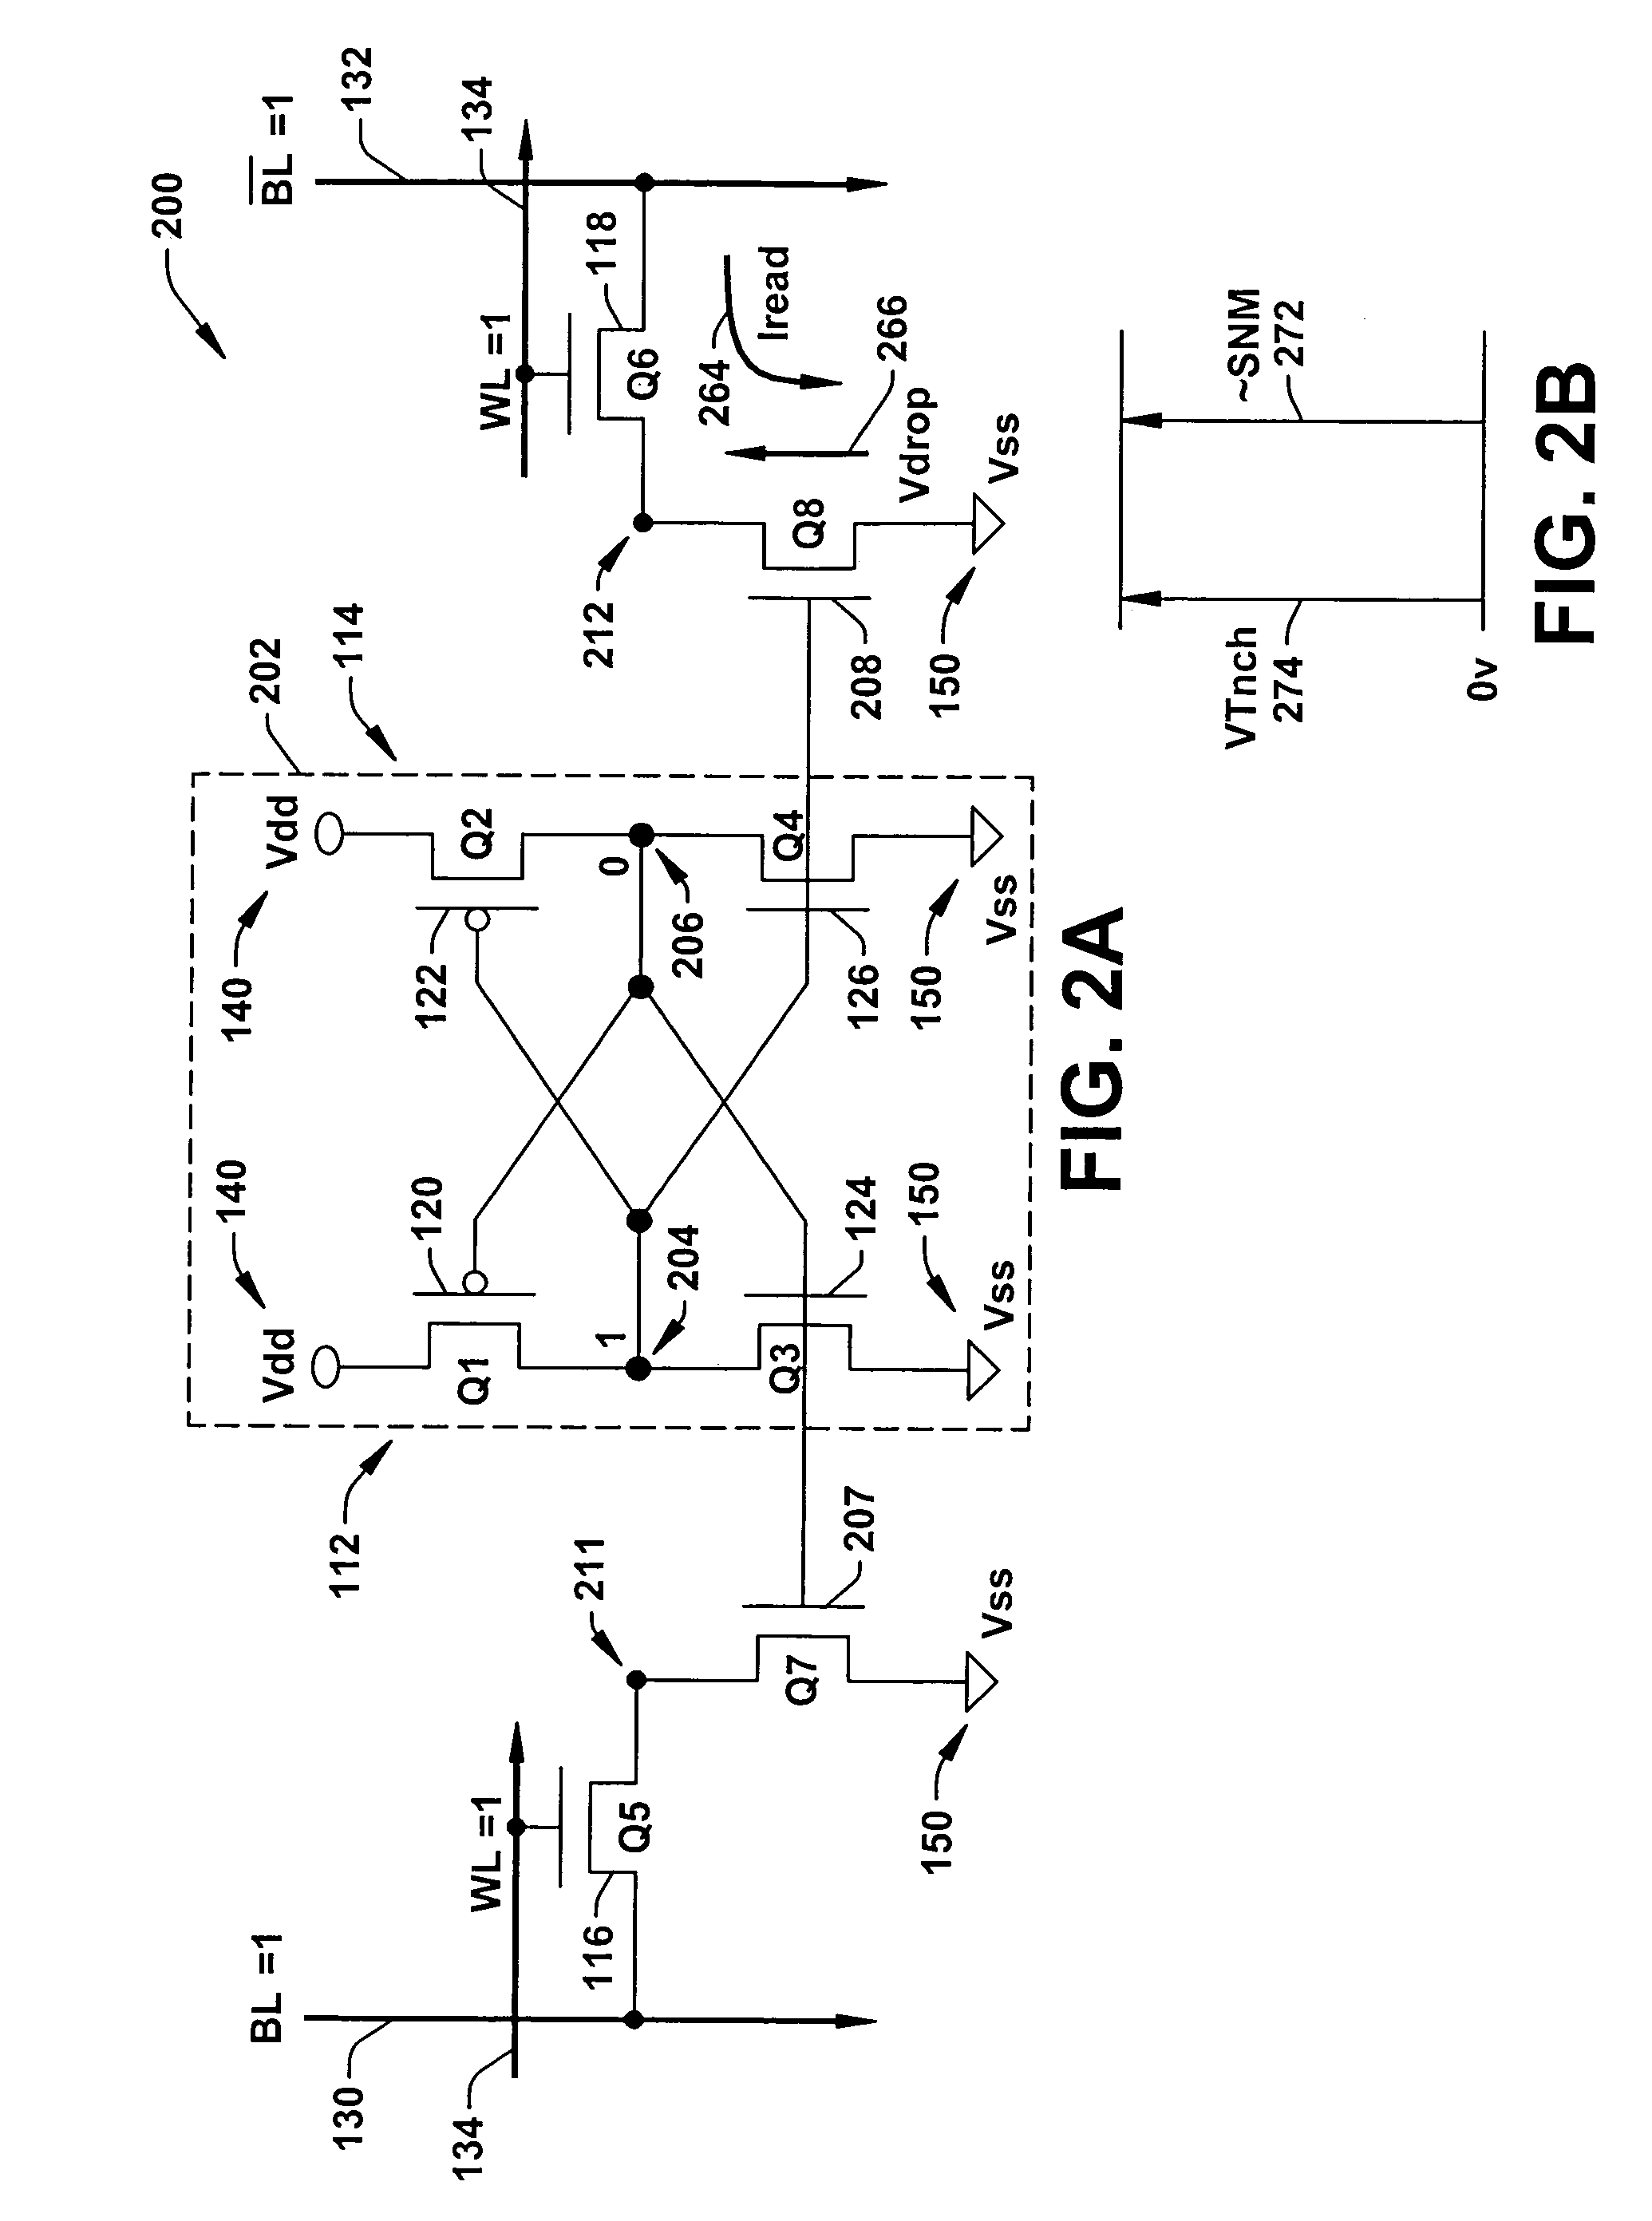 SRAM cell with independent static noise margin, trip voltage, and read current optimization